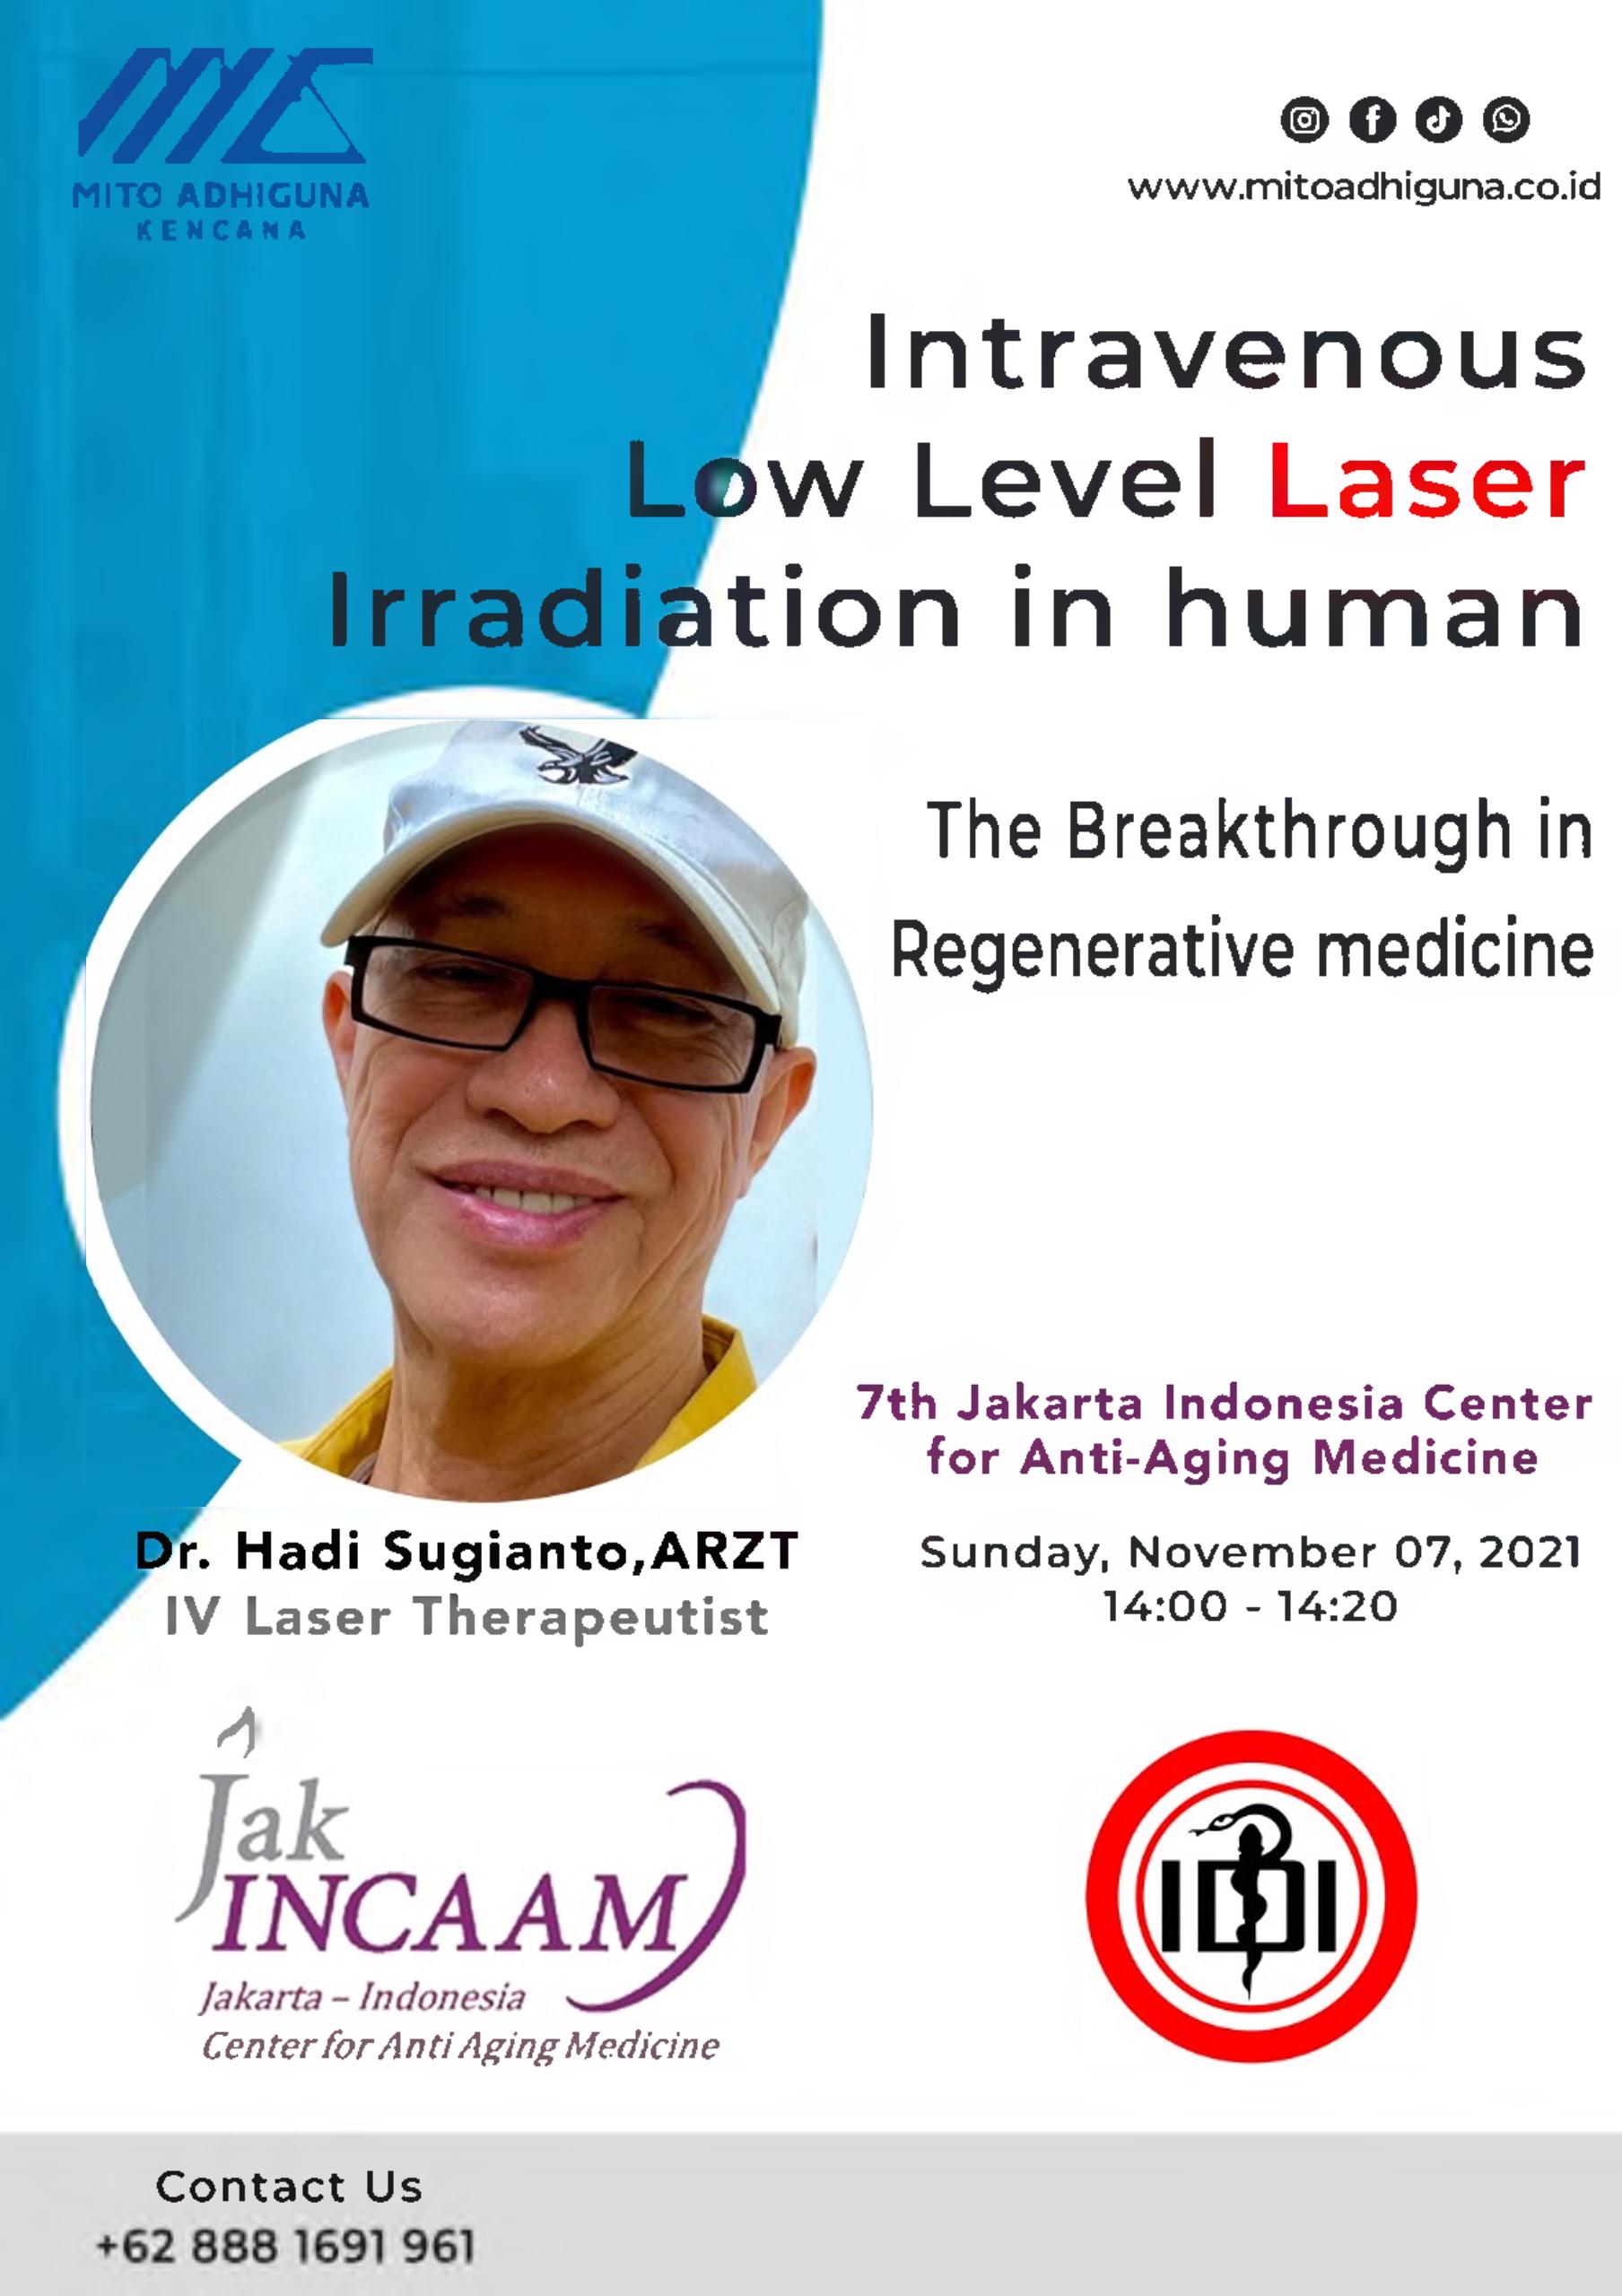 Intravenous Low Level Laser Irradiation in human